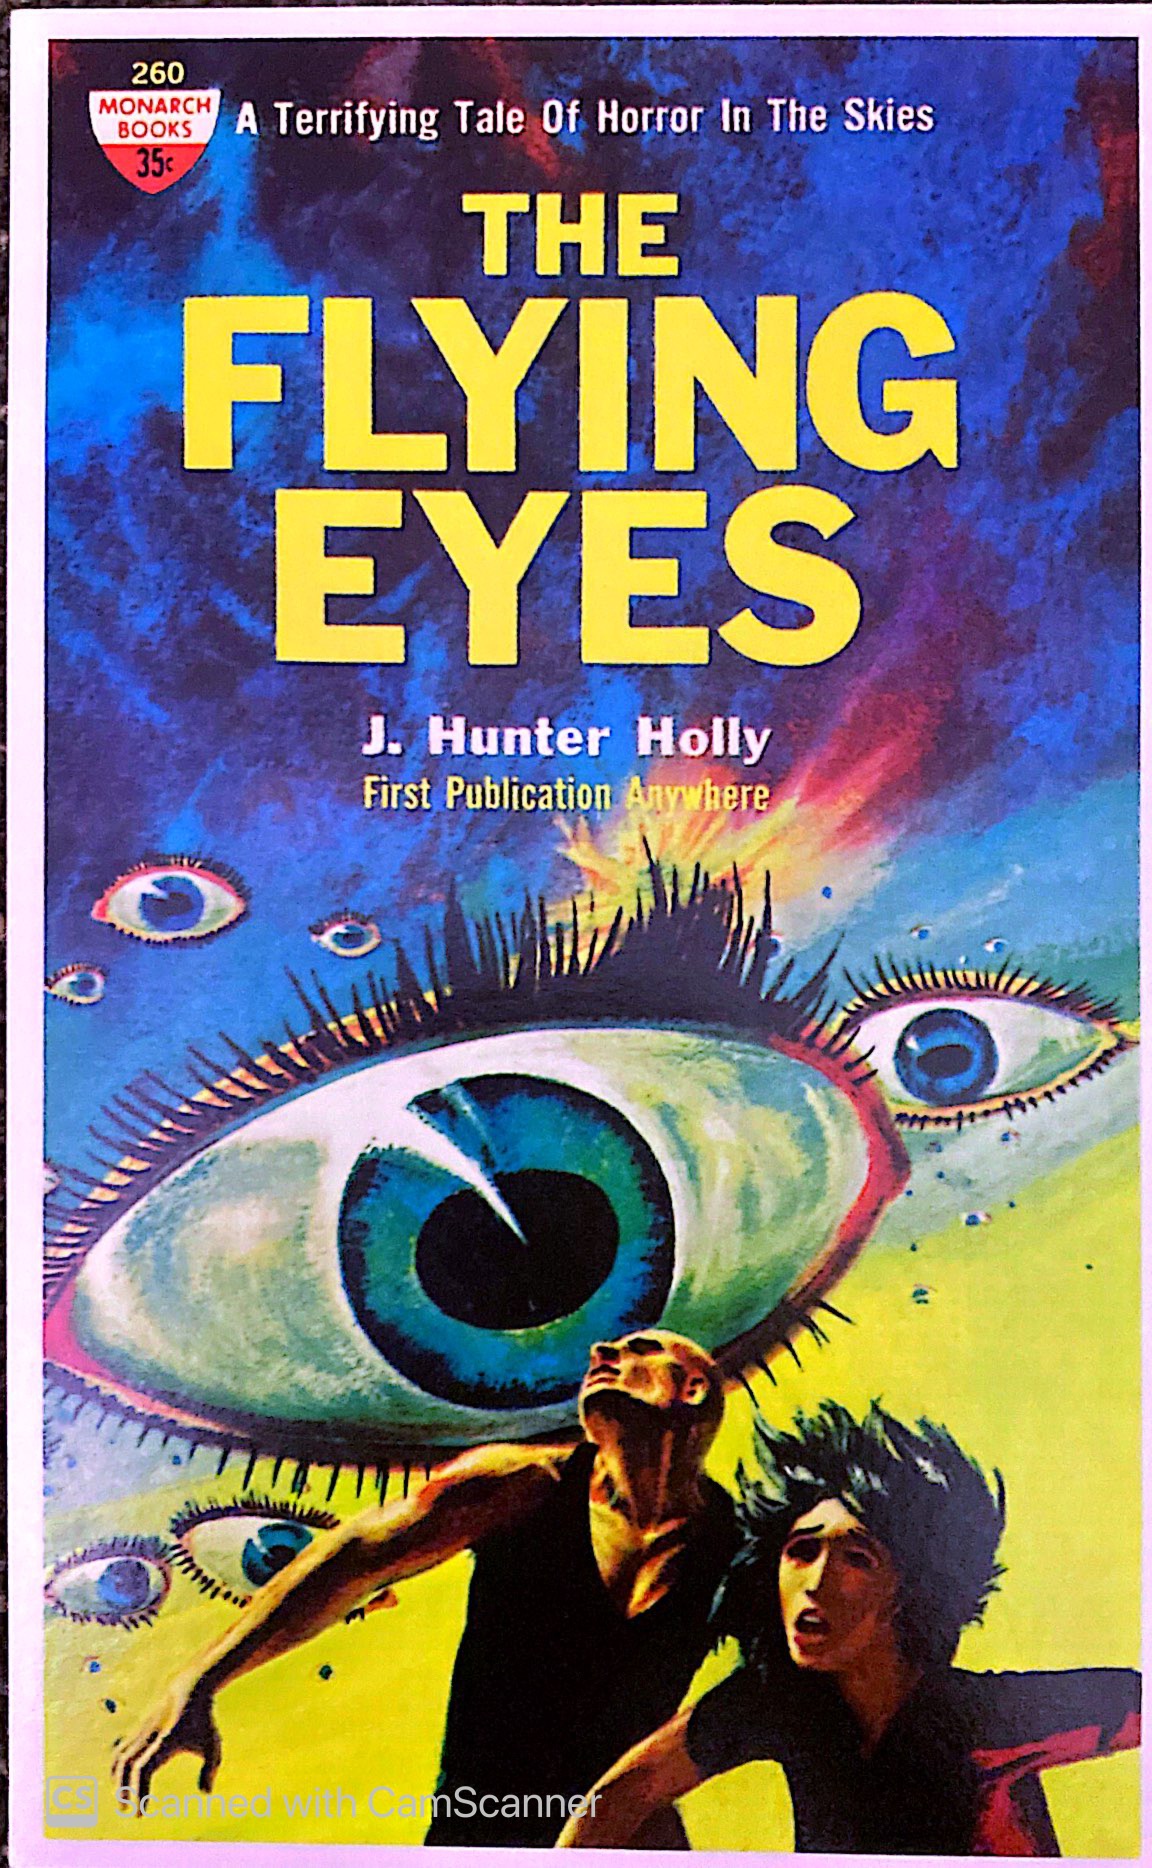 Vintage cover of the Flying Eyes, they are huge eyes chasing people